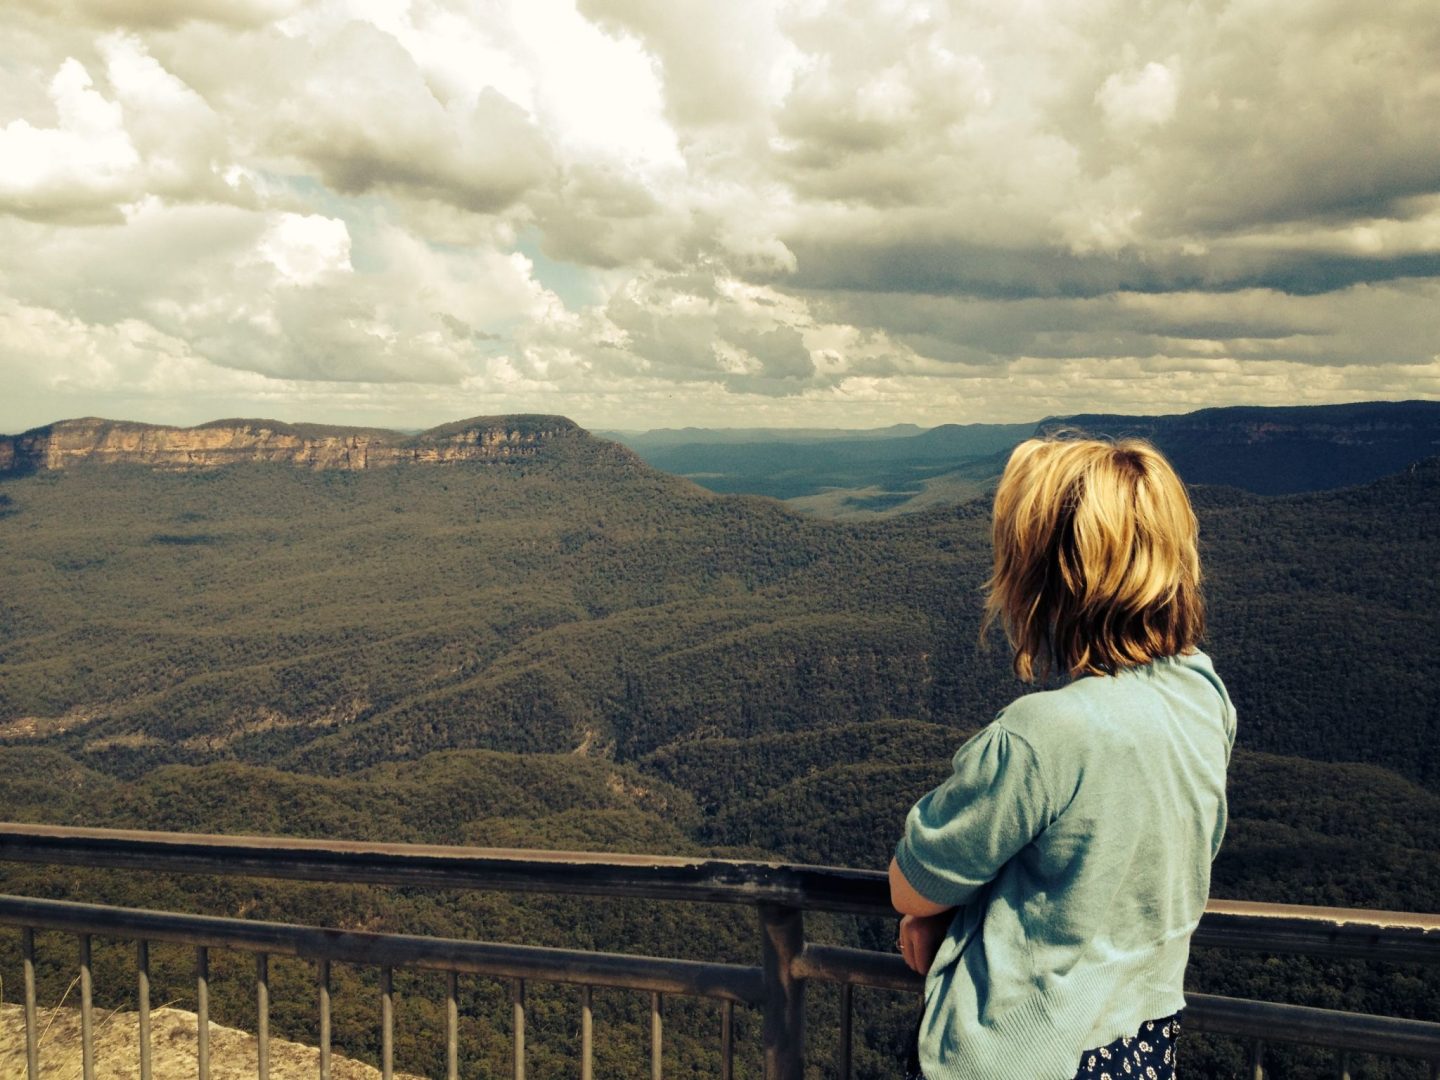 Laura taking in the view of the Blue Mountains